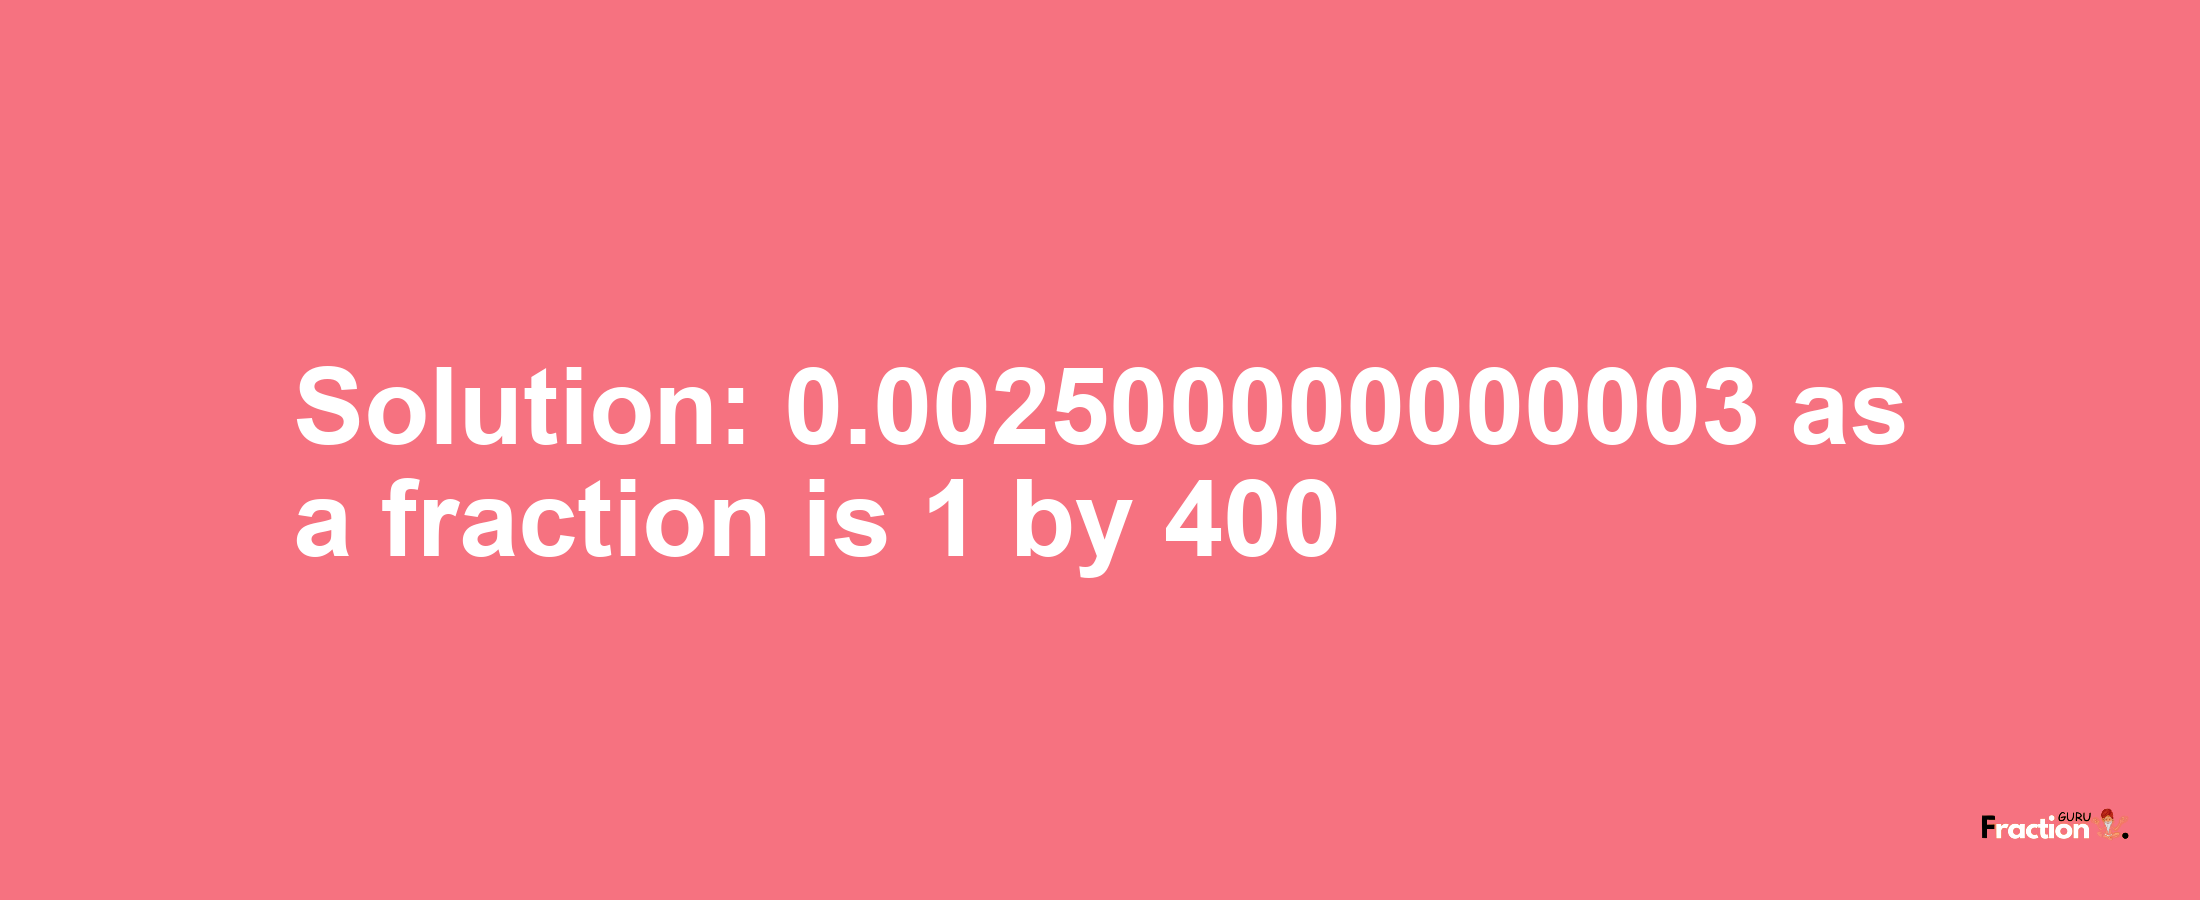 Solution:0.002500000000003 as a fraction is 1/400